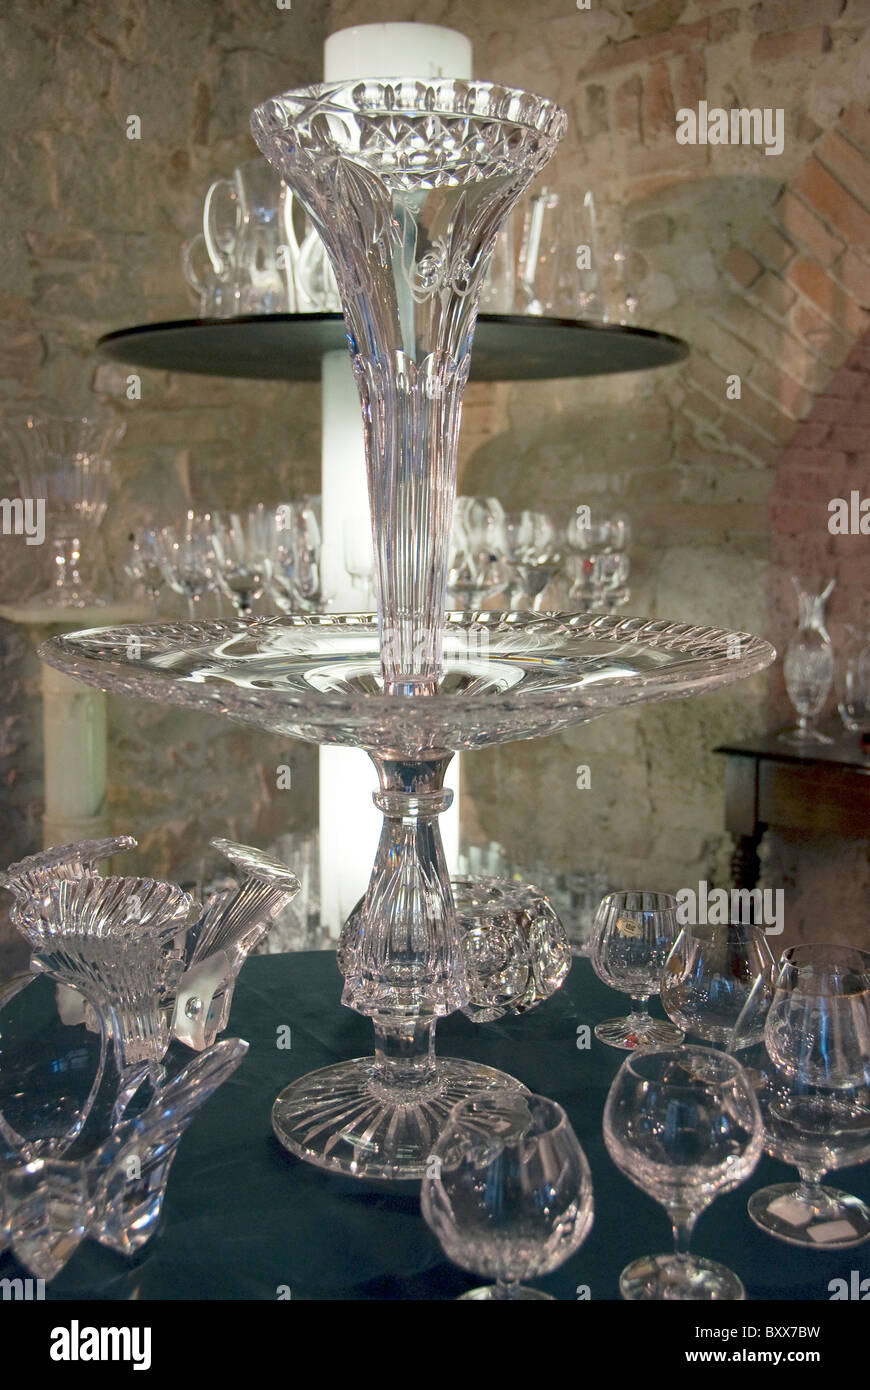 Crystal for sale in Colle Val d'Elsa, Tuscany, Italy, a town near Siena known for its production of crystal Stock Photo